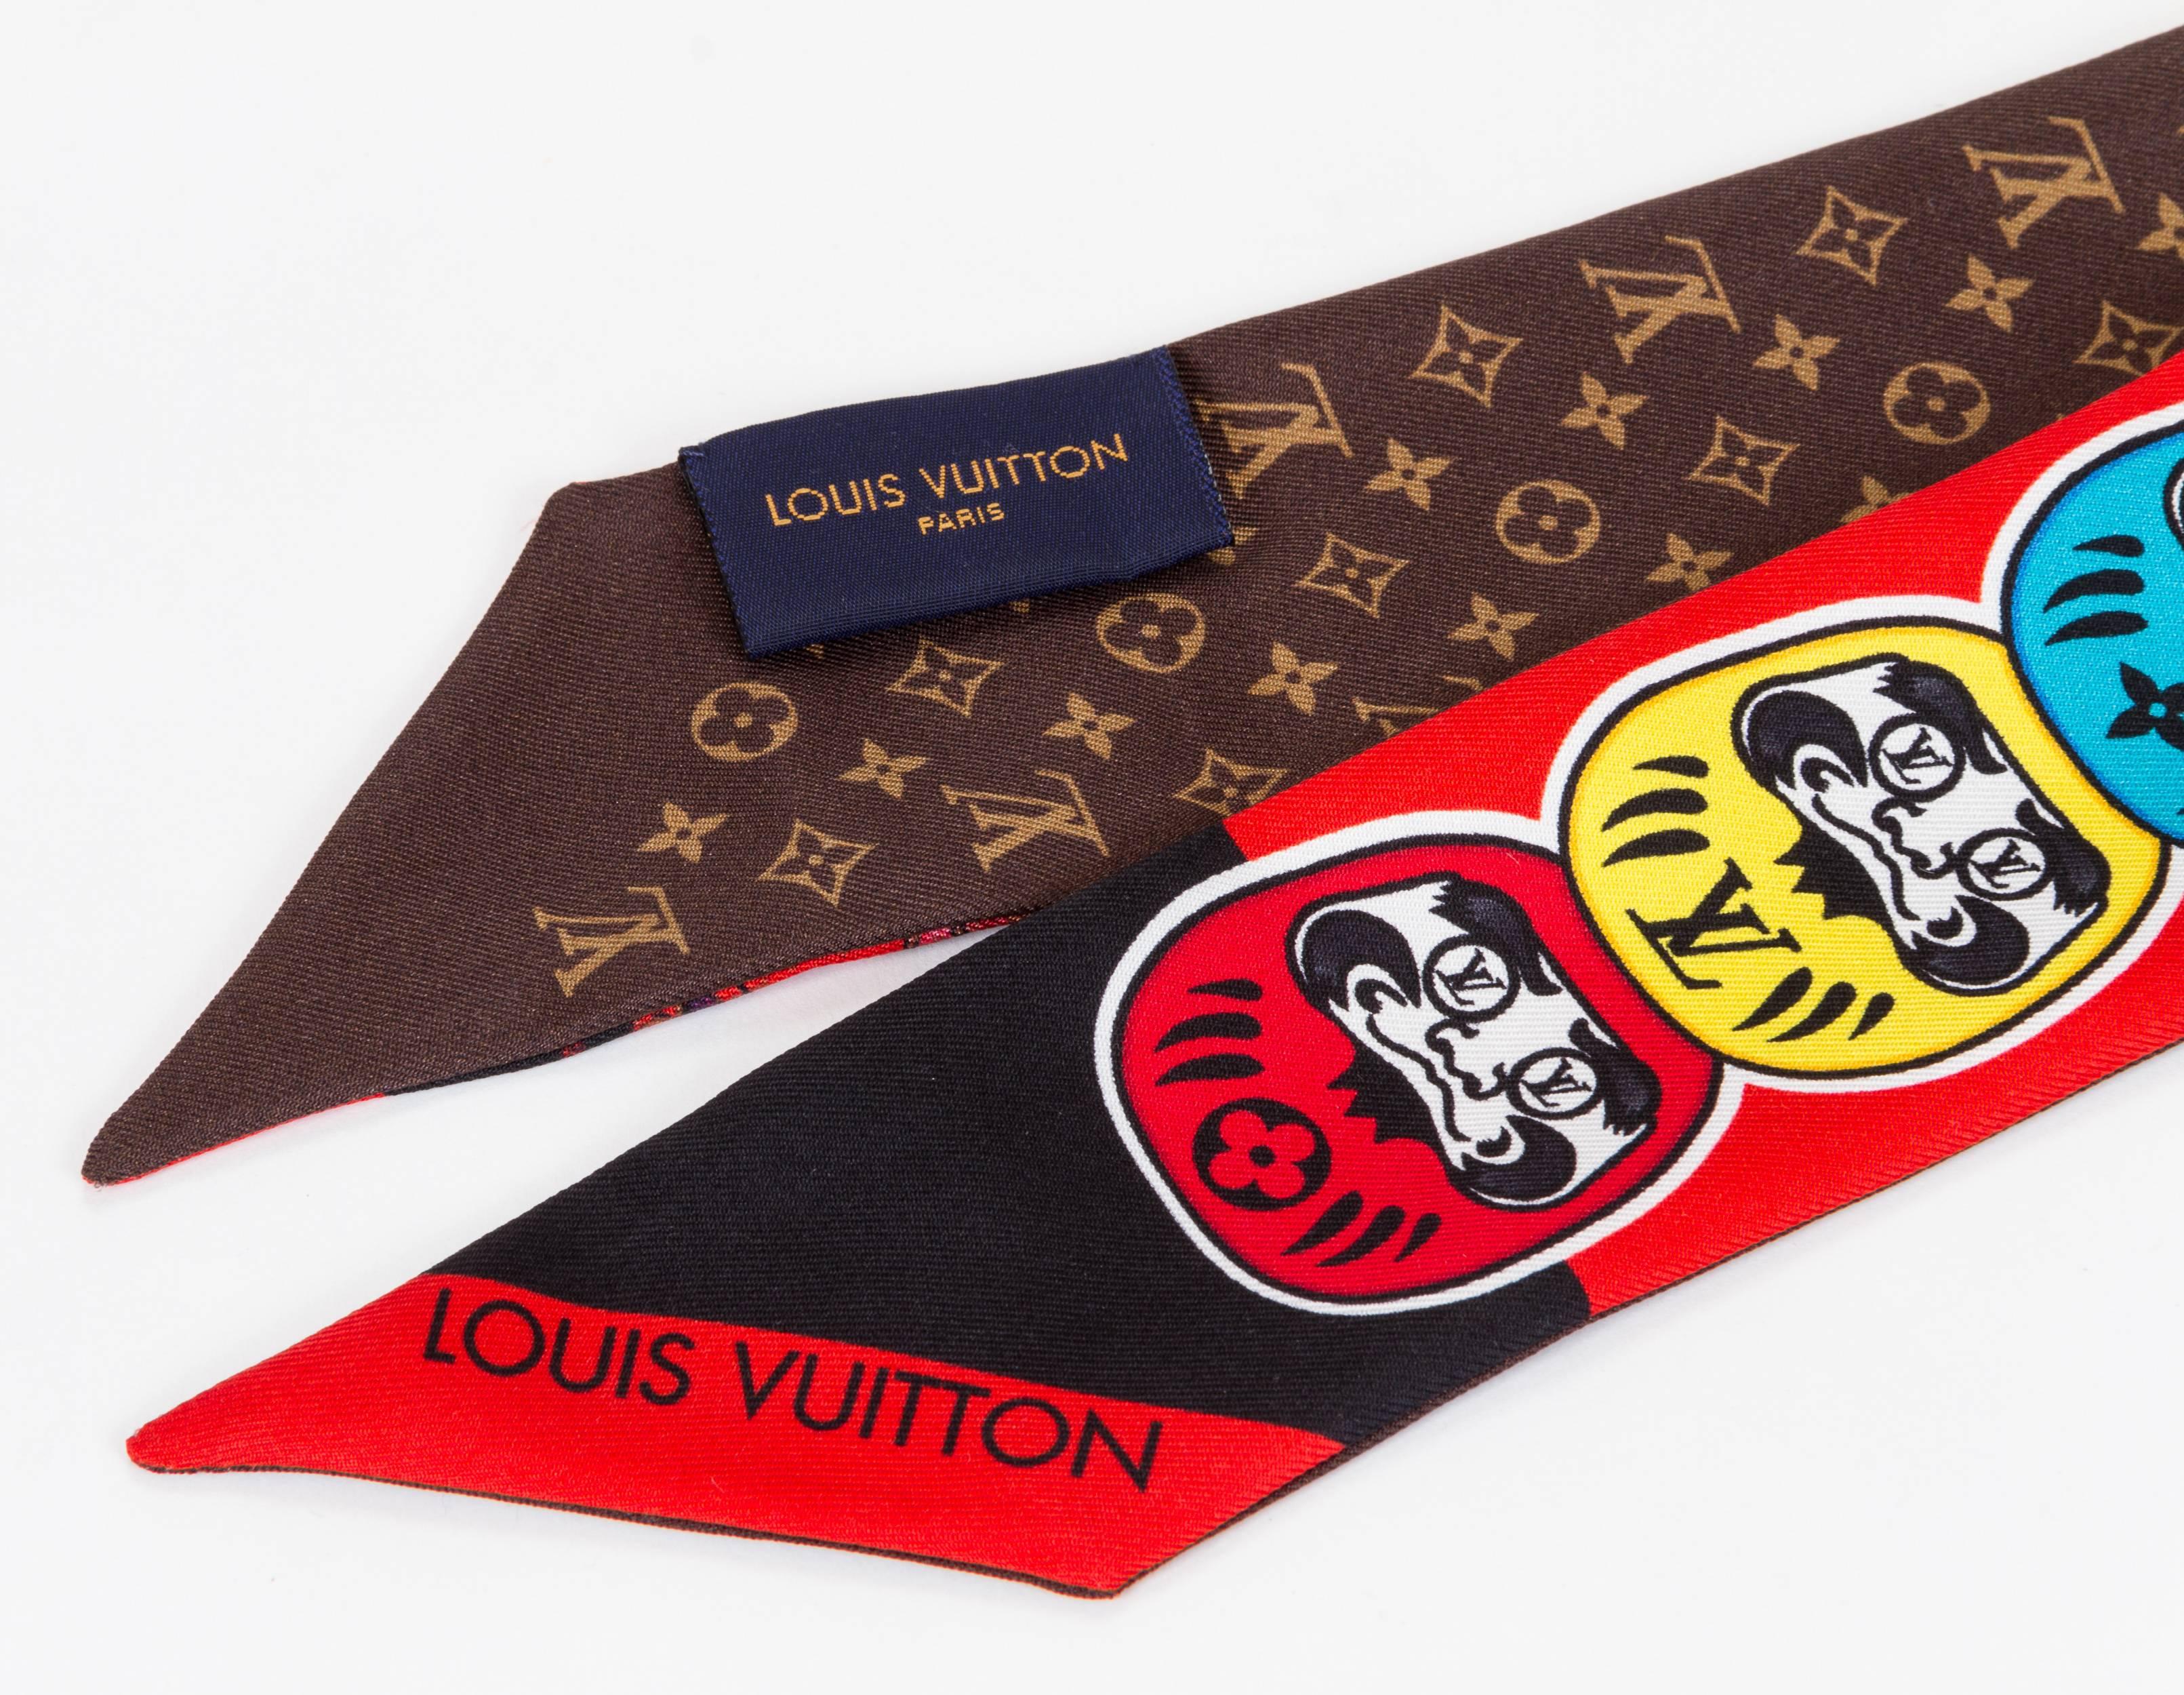 Louis Vuitton sold out limited edition Kabuki bandeau . 100% silk, made in Italy. Comes with original box.